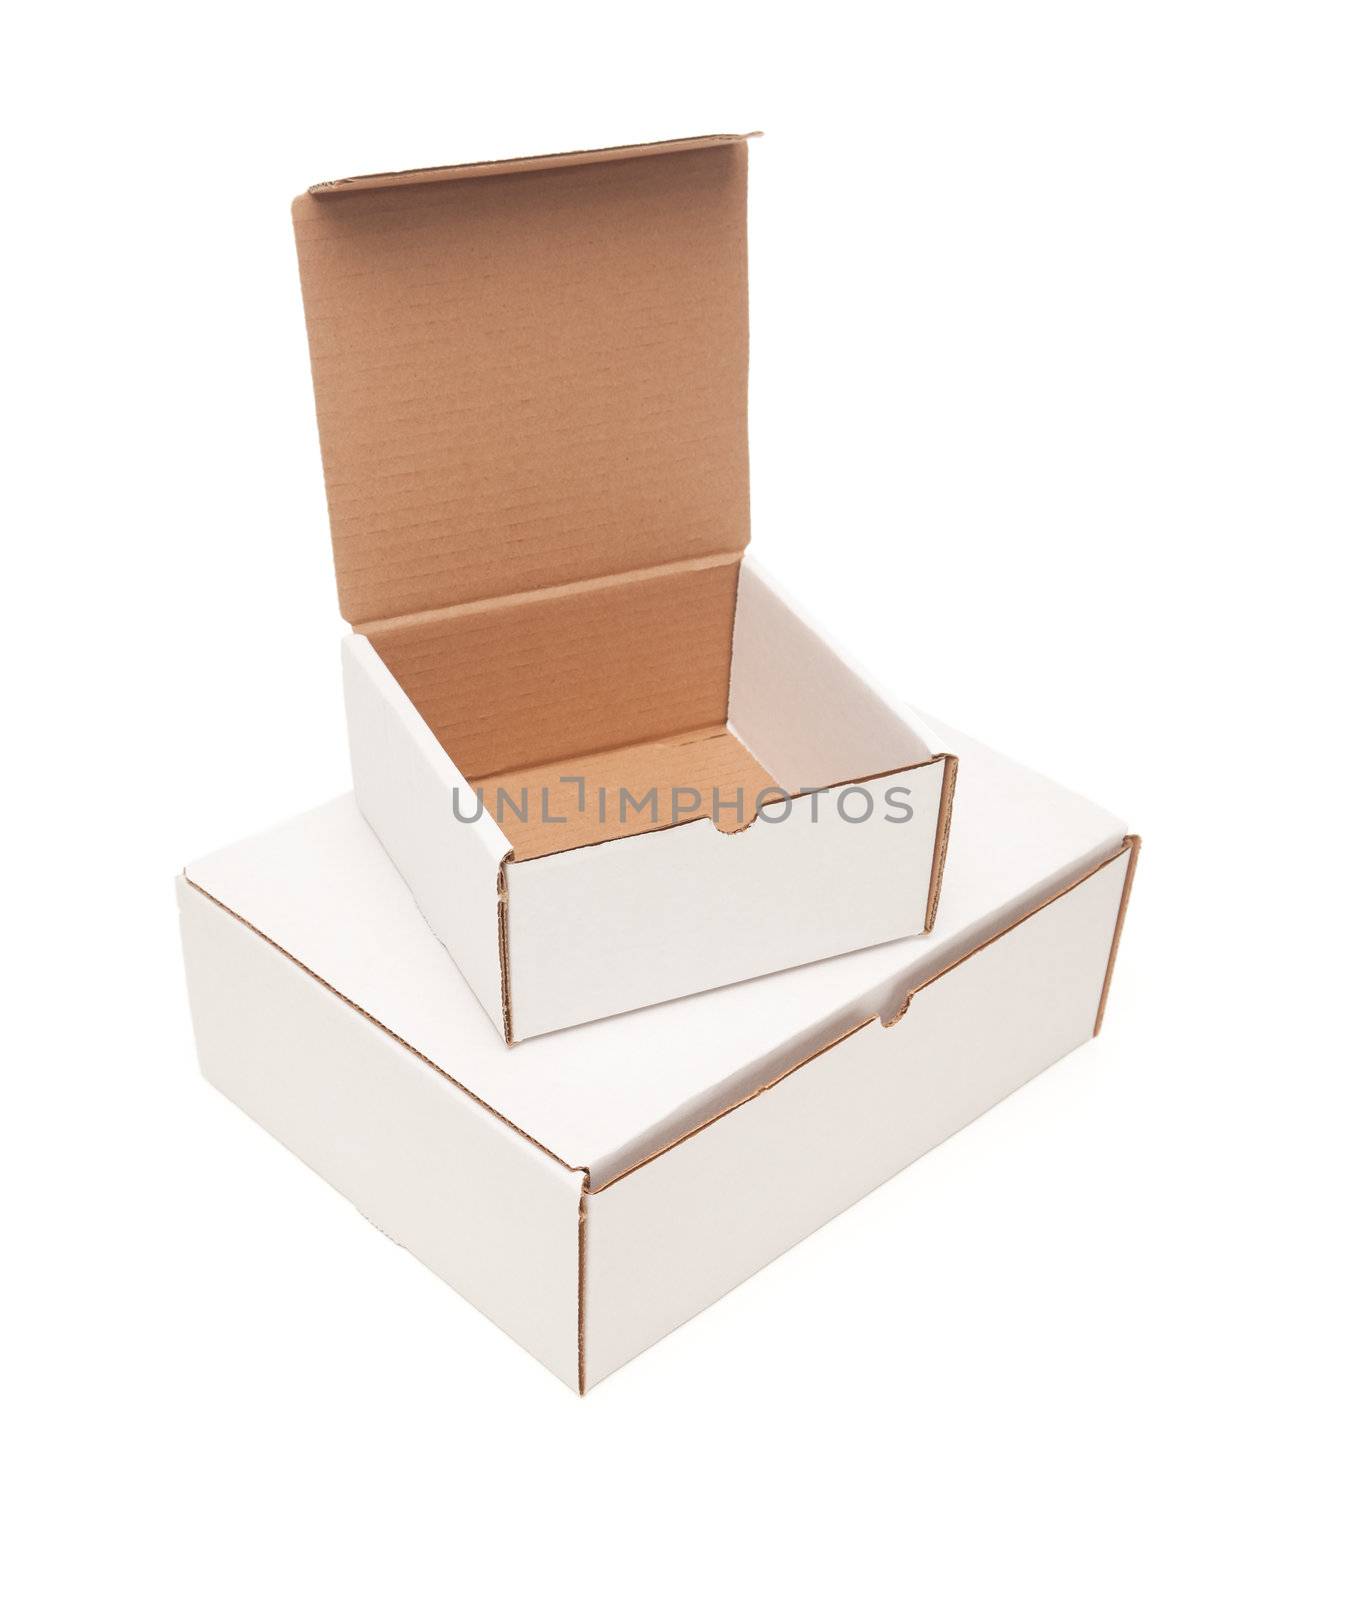 Stack of Blank White Cardboard Boxes, Top Opened, Isolated on a White Background.